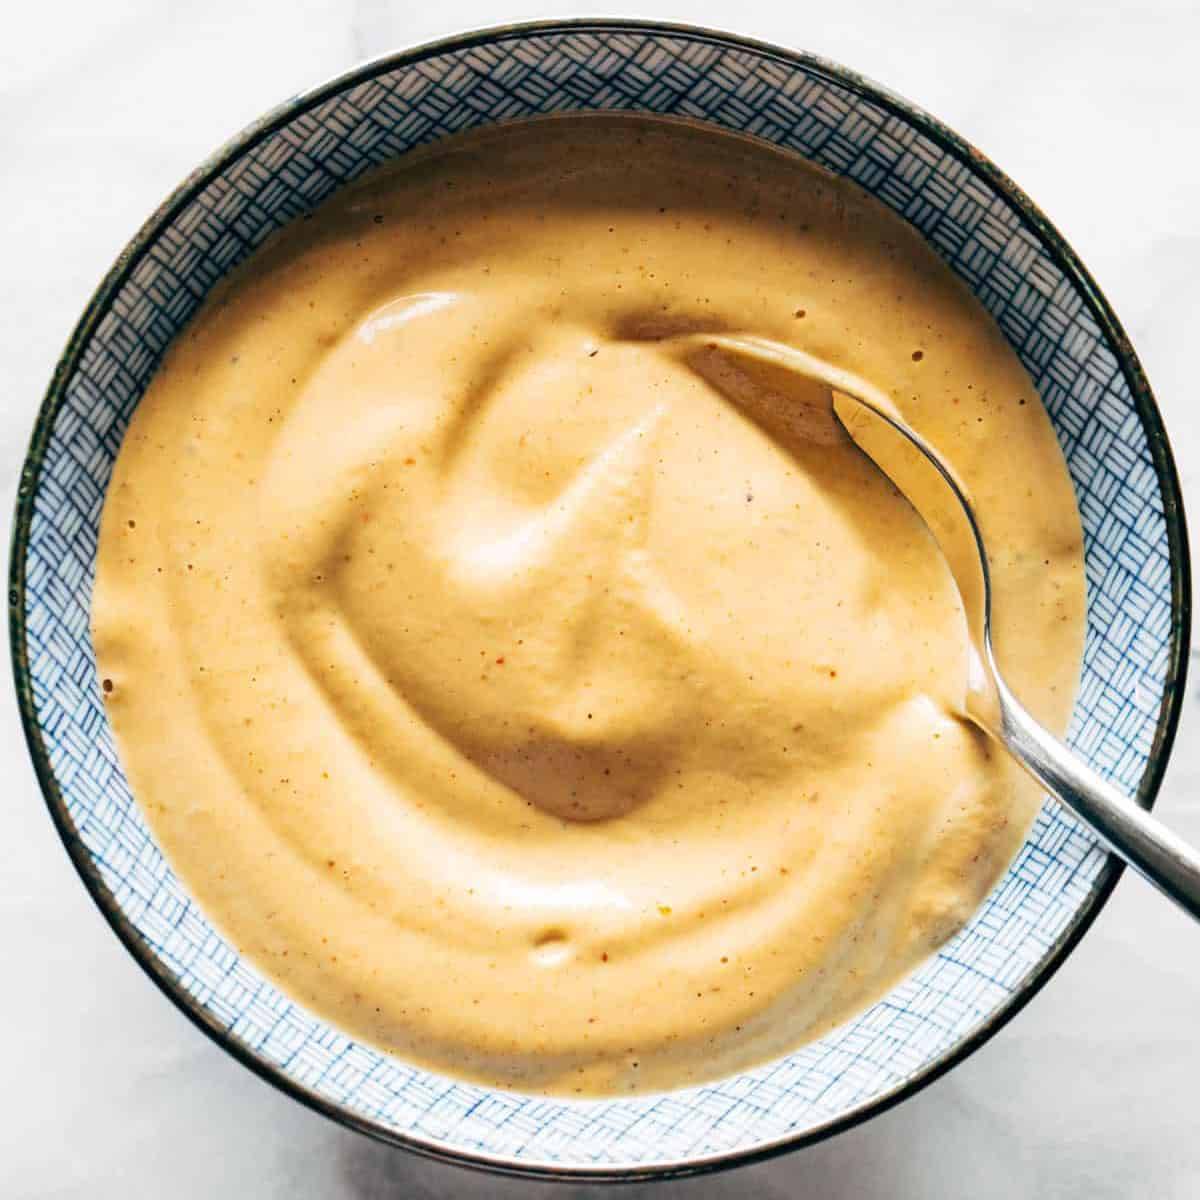 Chipotle cashew queso sauce in a bowl with a spoon.